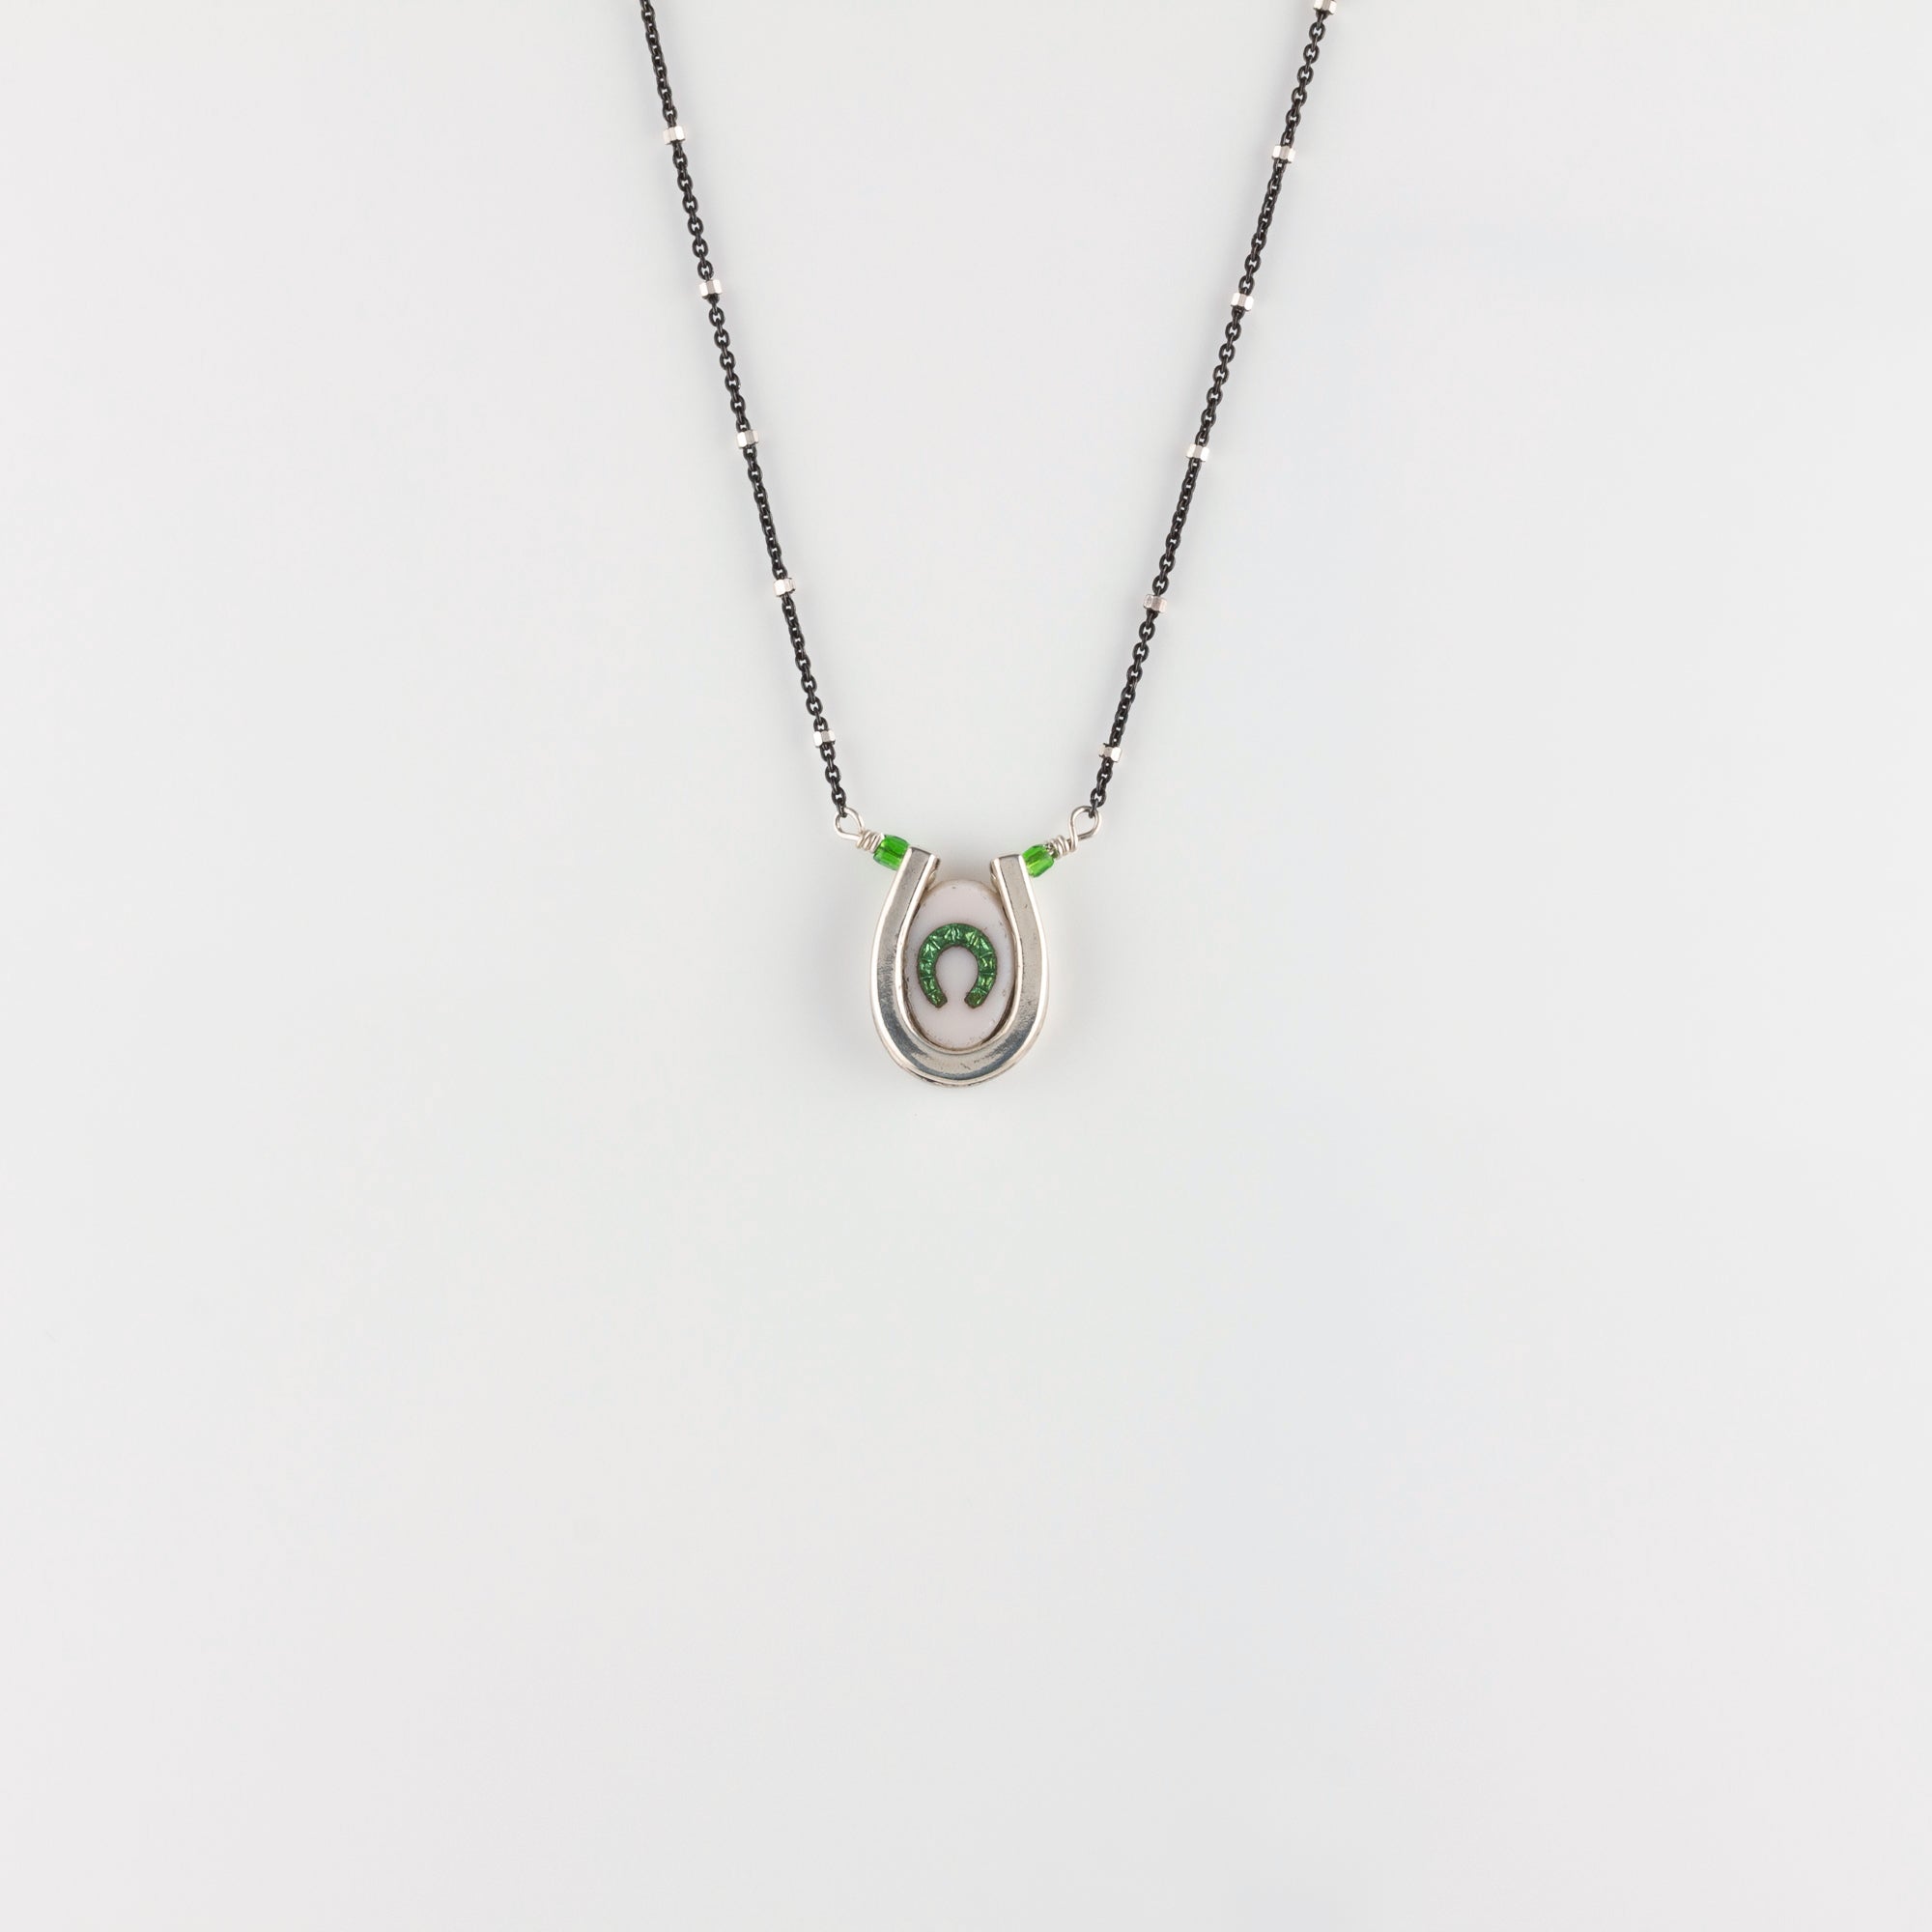 DOUBLE LUCK // SILVER NECKLACE // WHITE & GREEN